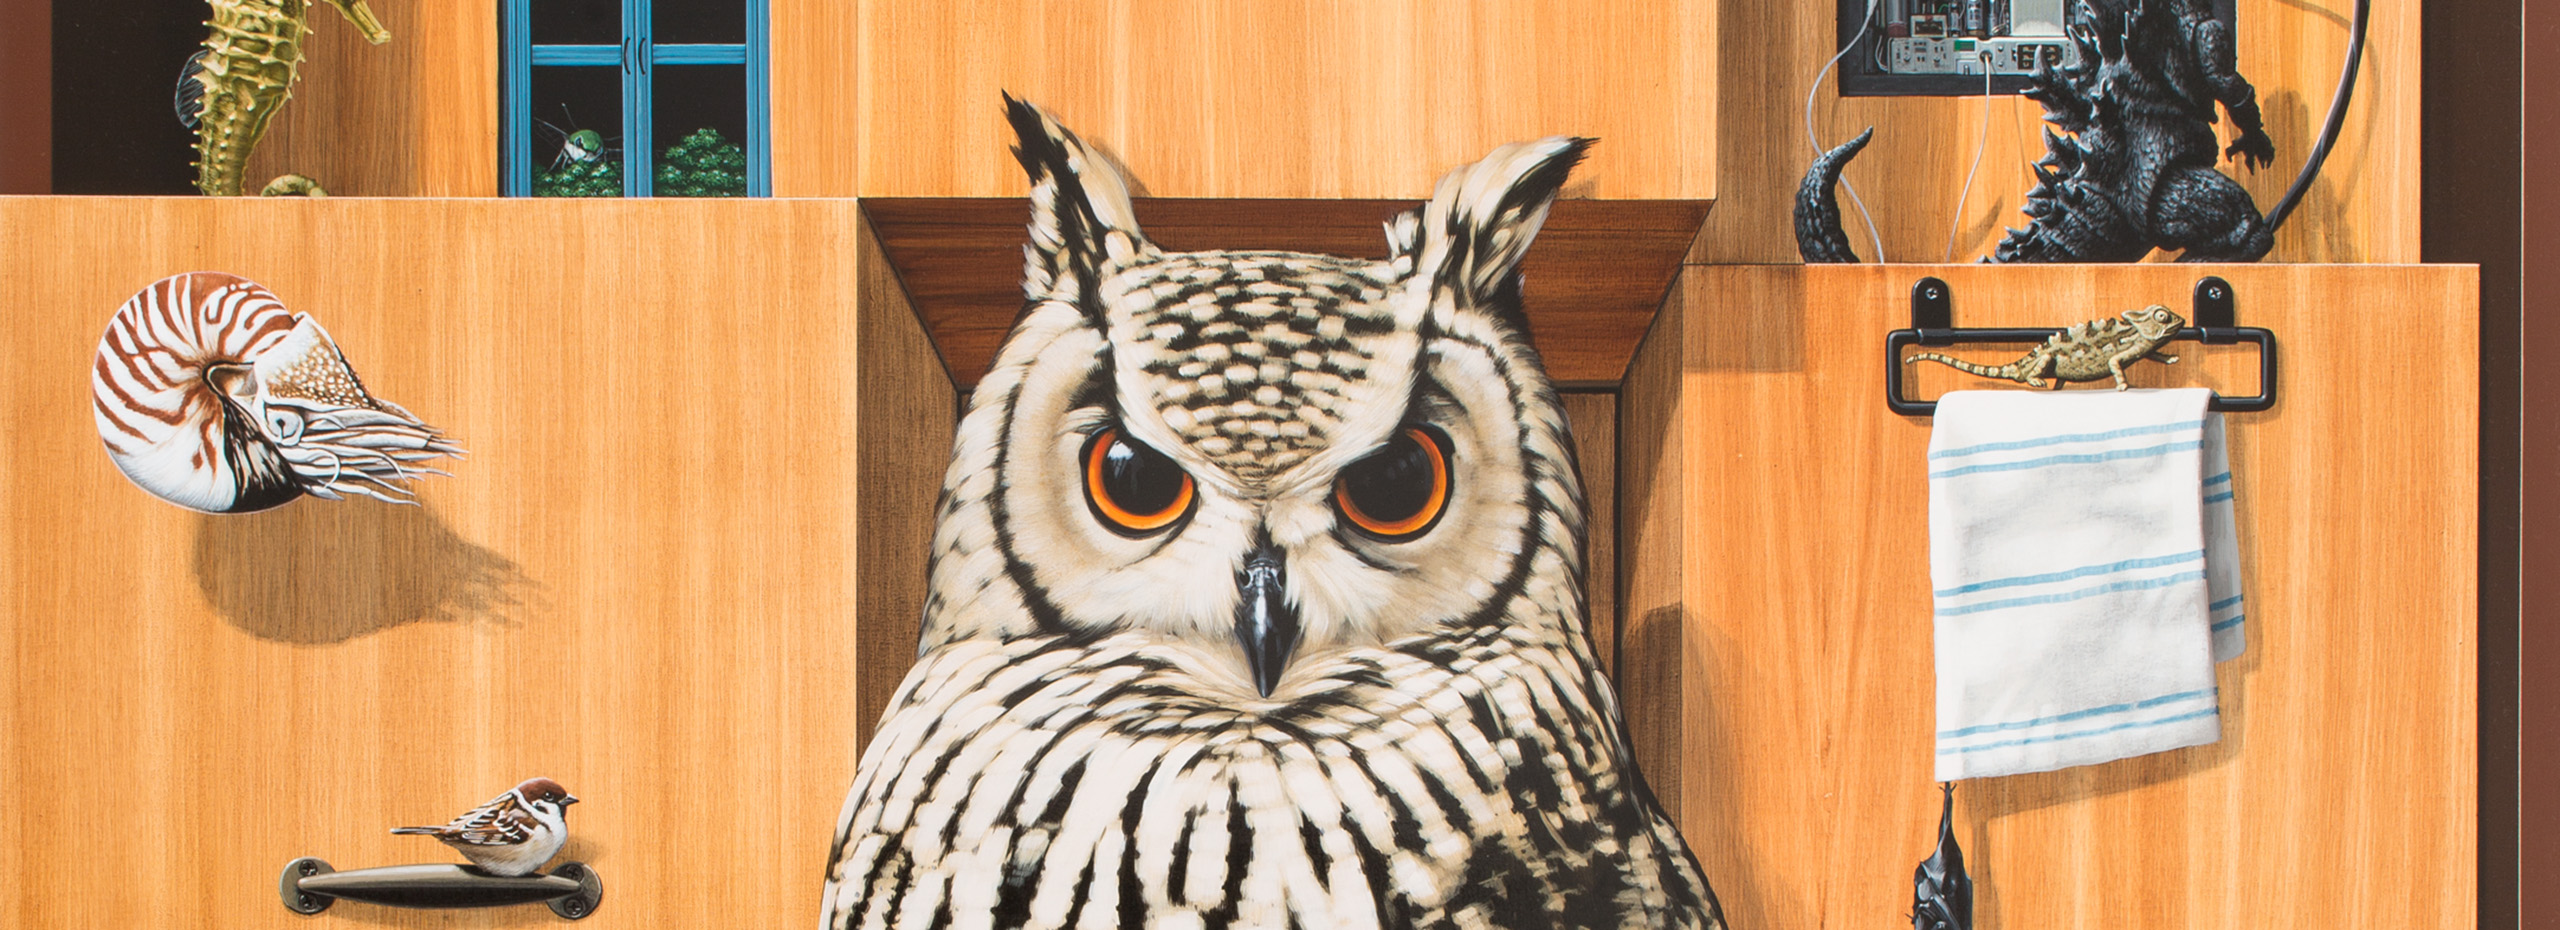 A painting of an owl in front of a wooden wall with small drawers and objects